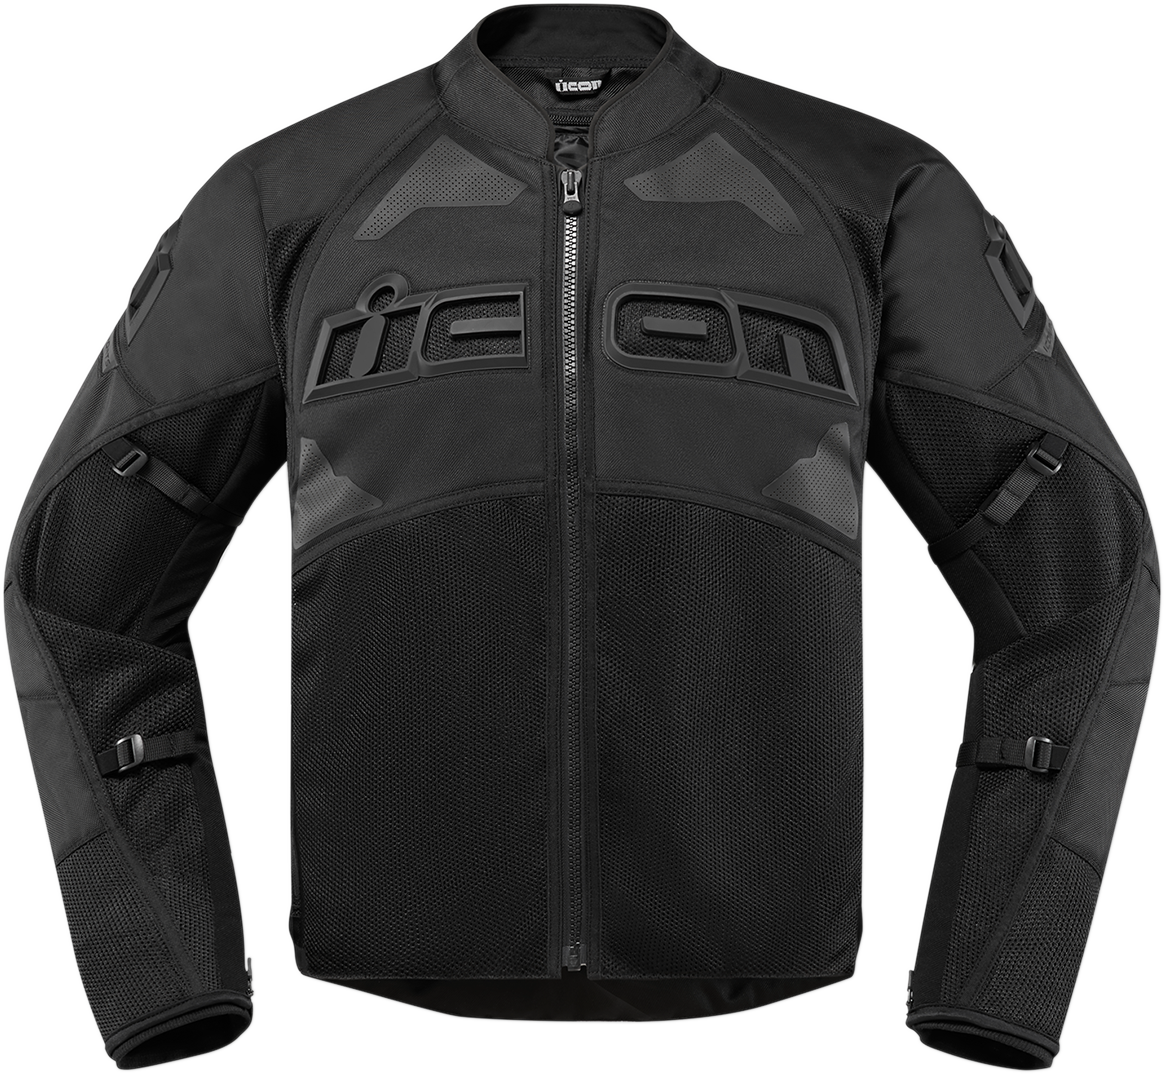 ICON Contra2™ Jacket - Stealth - Small 2820-4736